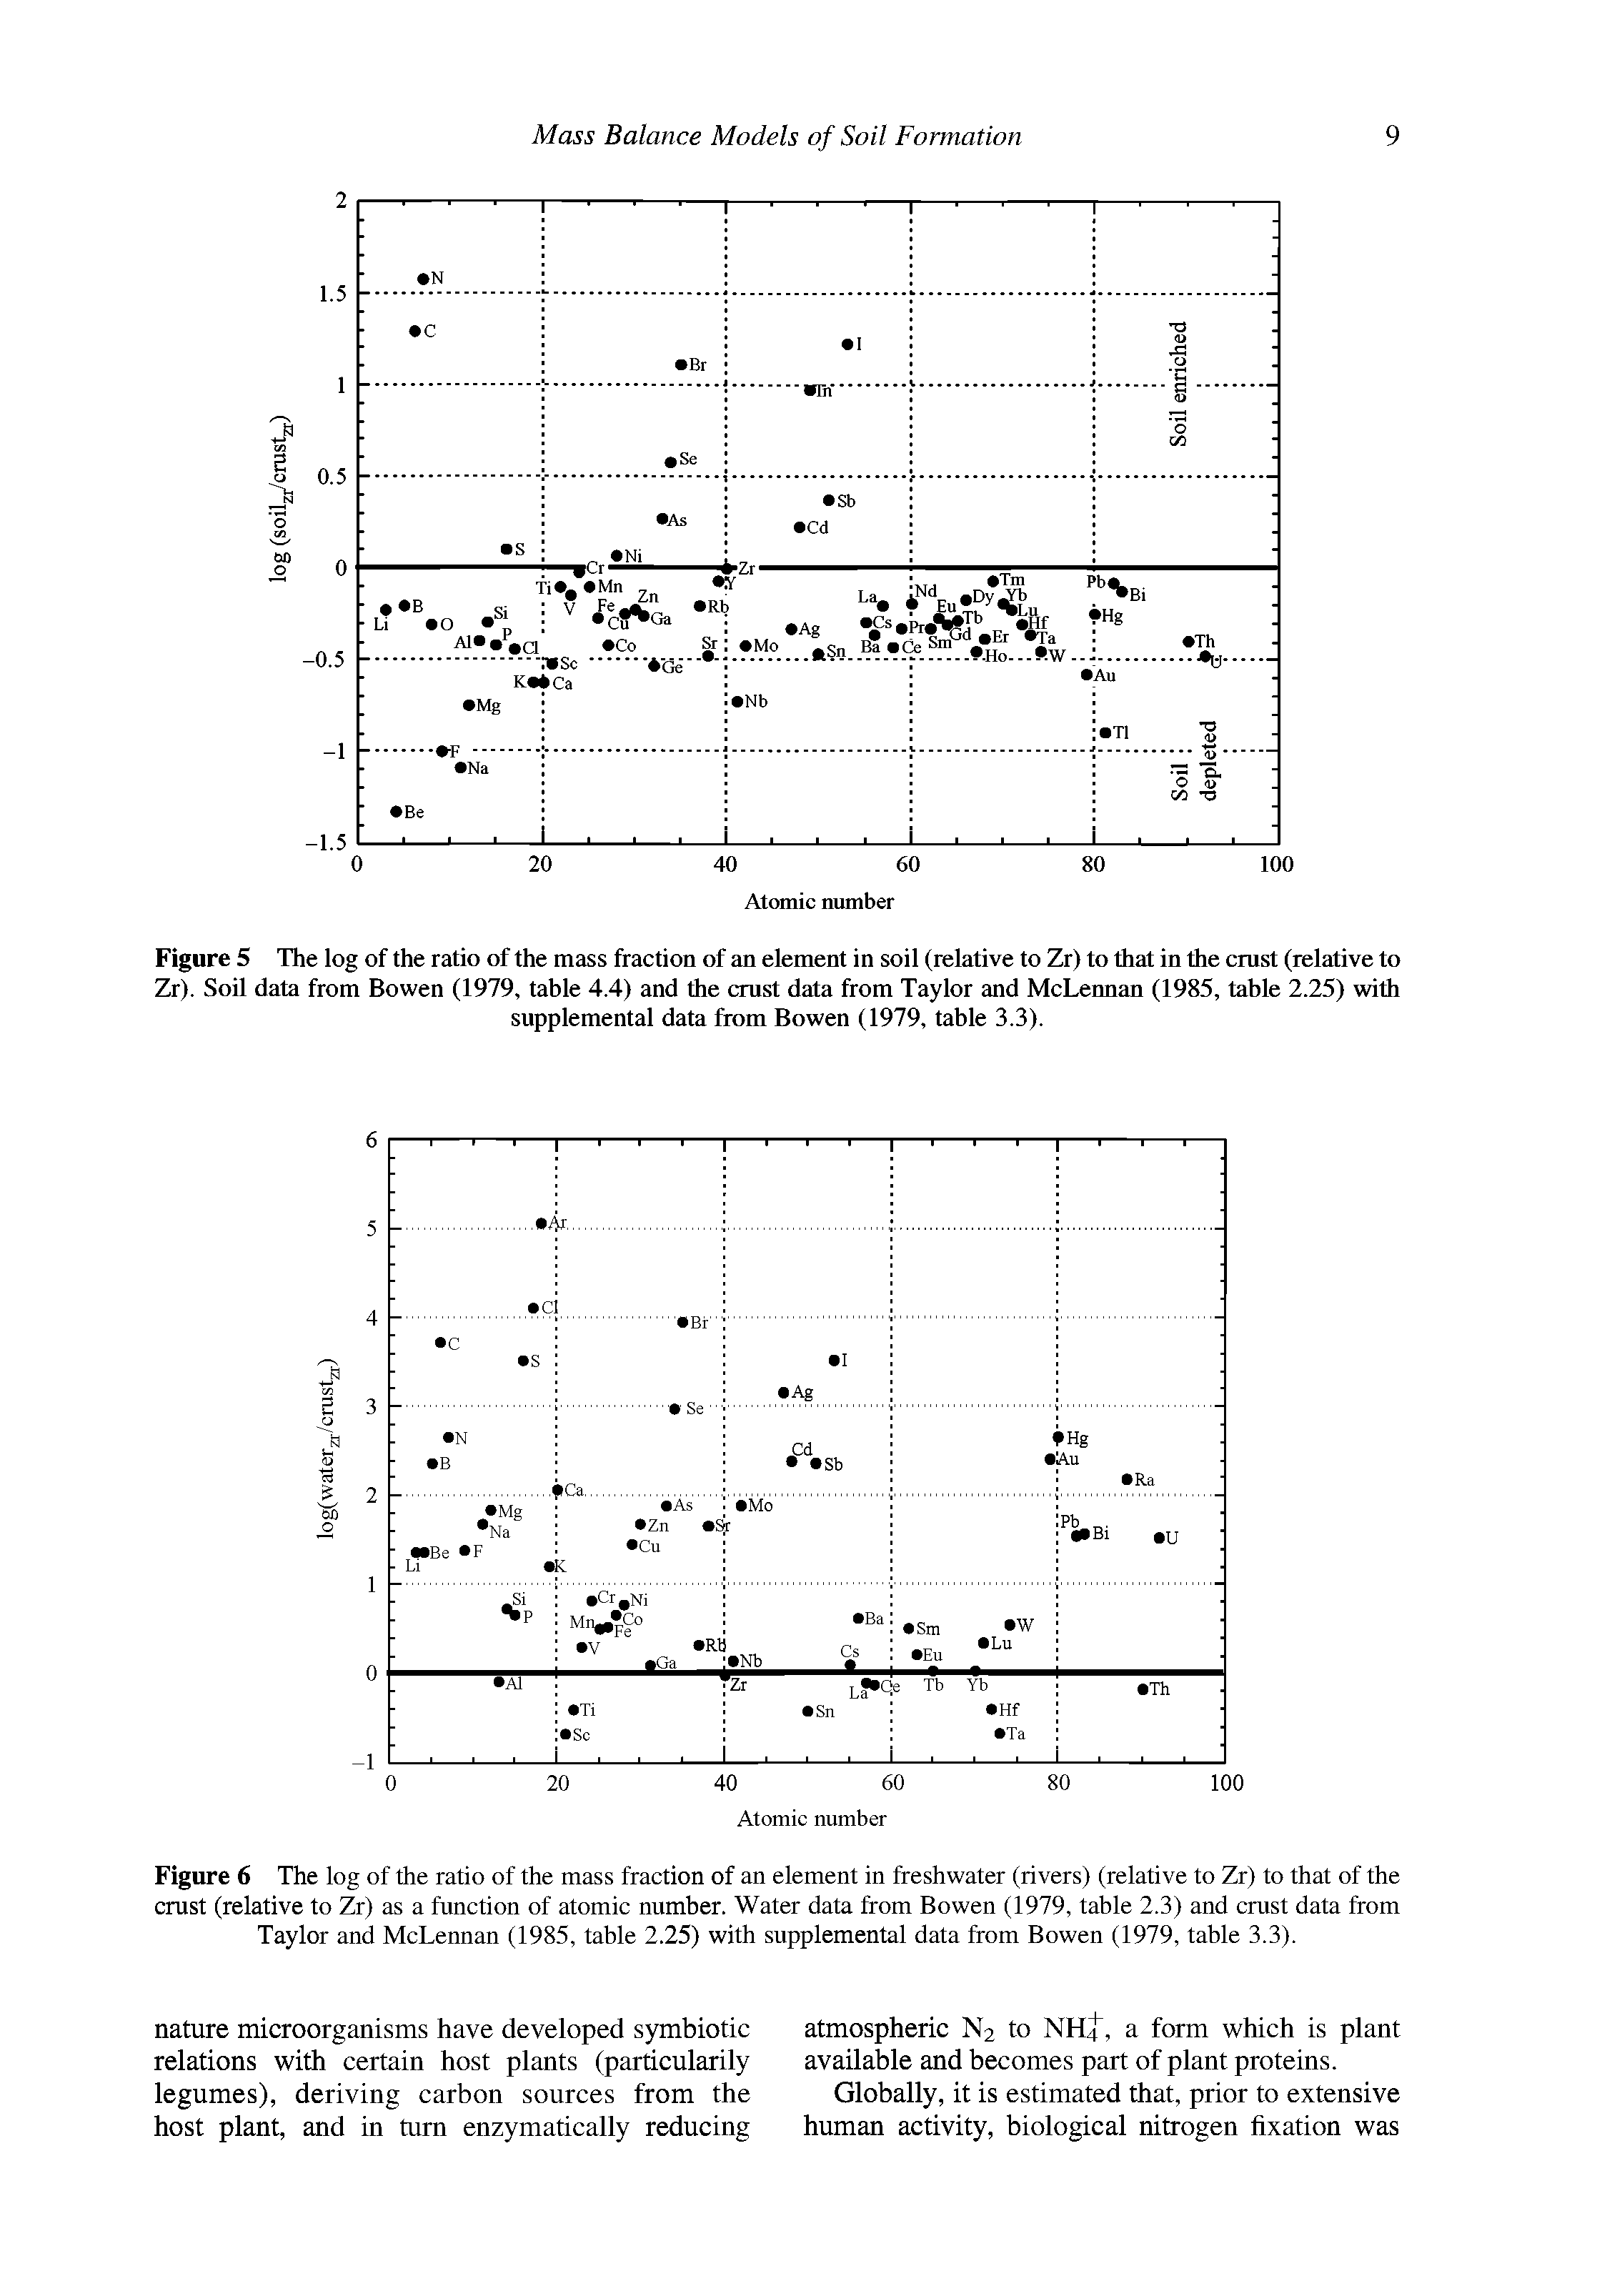 Figure 6 The log of the ratio of the mass fraction of an element in freshwater (rivers) (relative to Zr) to that of the crust (relative to Zr) as a function of atomic number. Water data from Bowen (1979, table 2.3) and crust data from Taylor and McLennan (1985, table 2.25) with supplemental data from Bowen (1979, table 3.3).